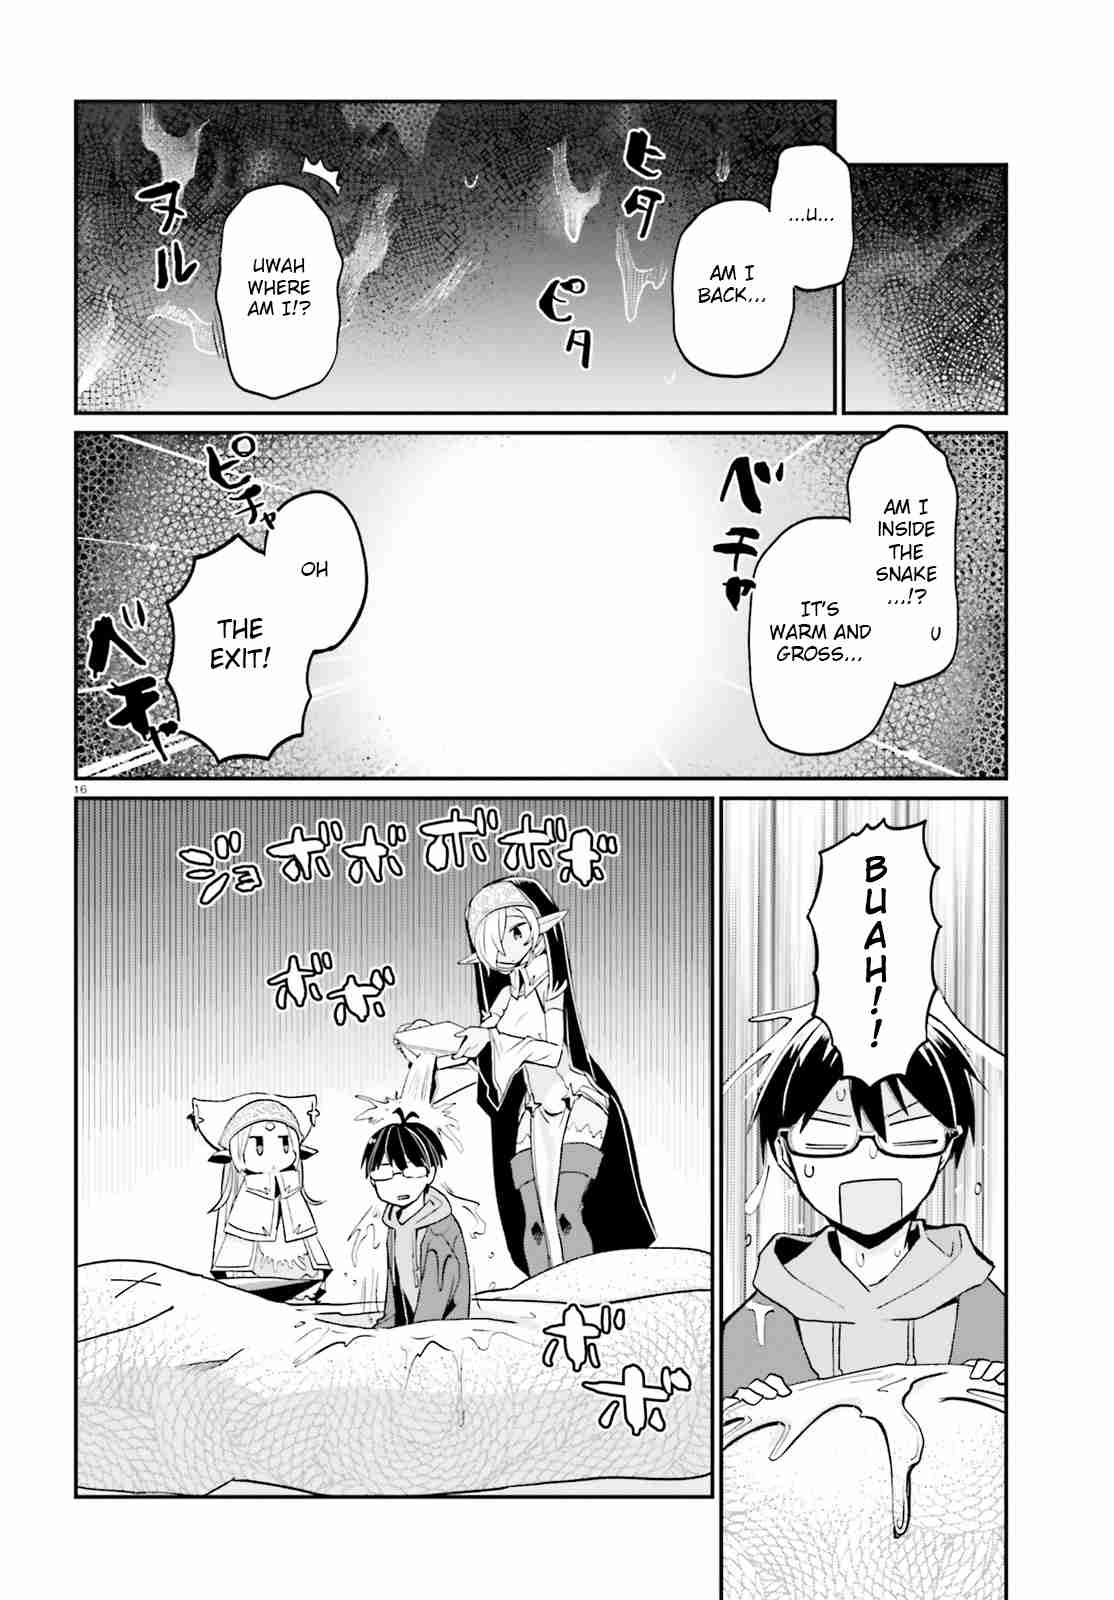 Welcome To Religion In Another World! Vol. 1 Ch. 5 Welcome to mister Tody's homecoming